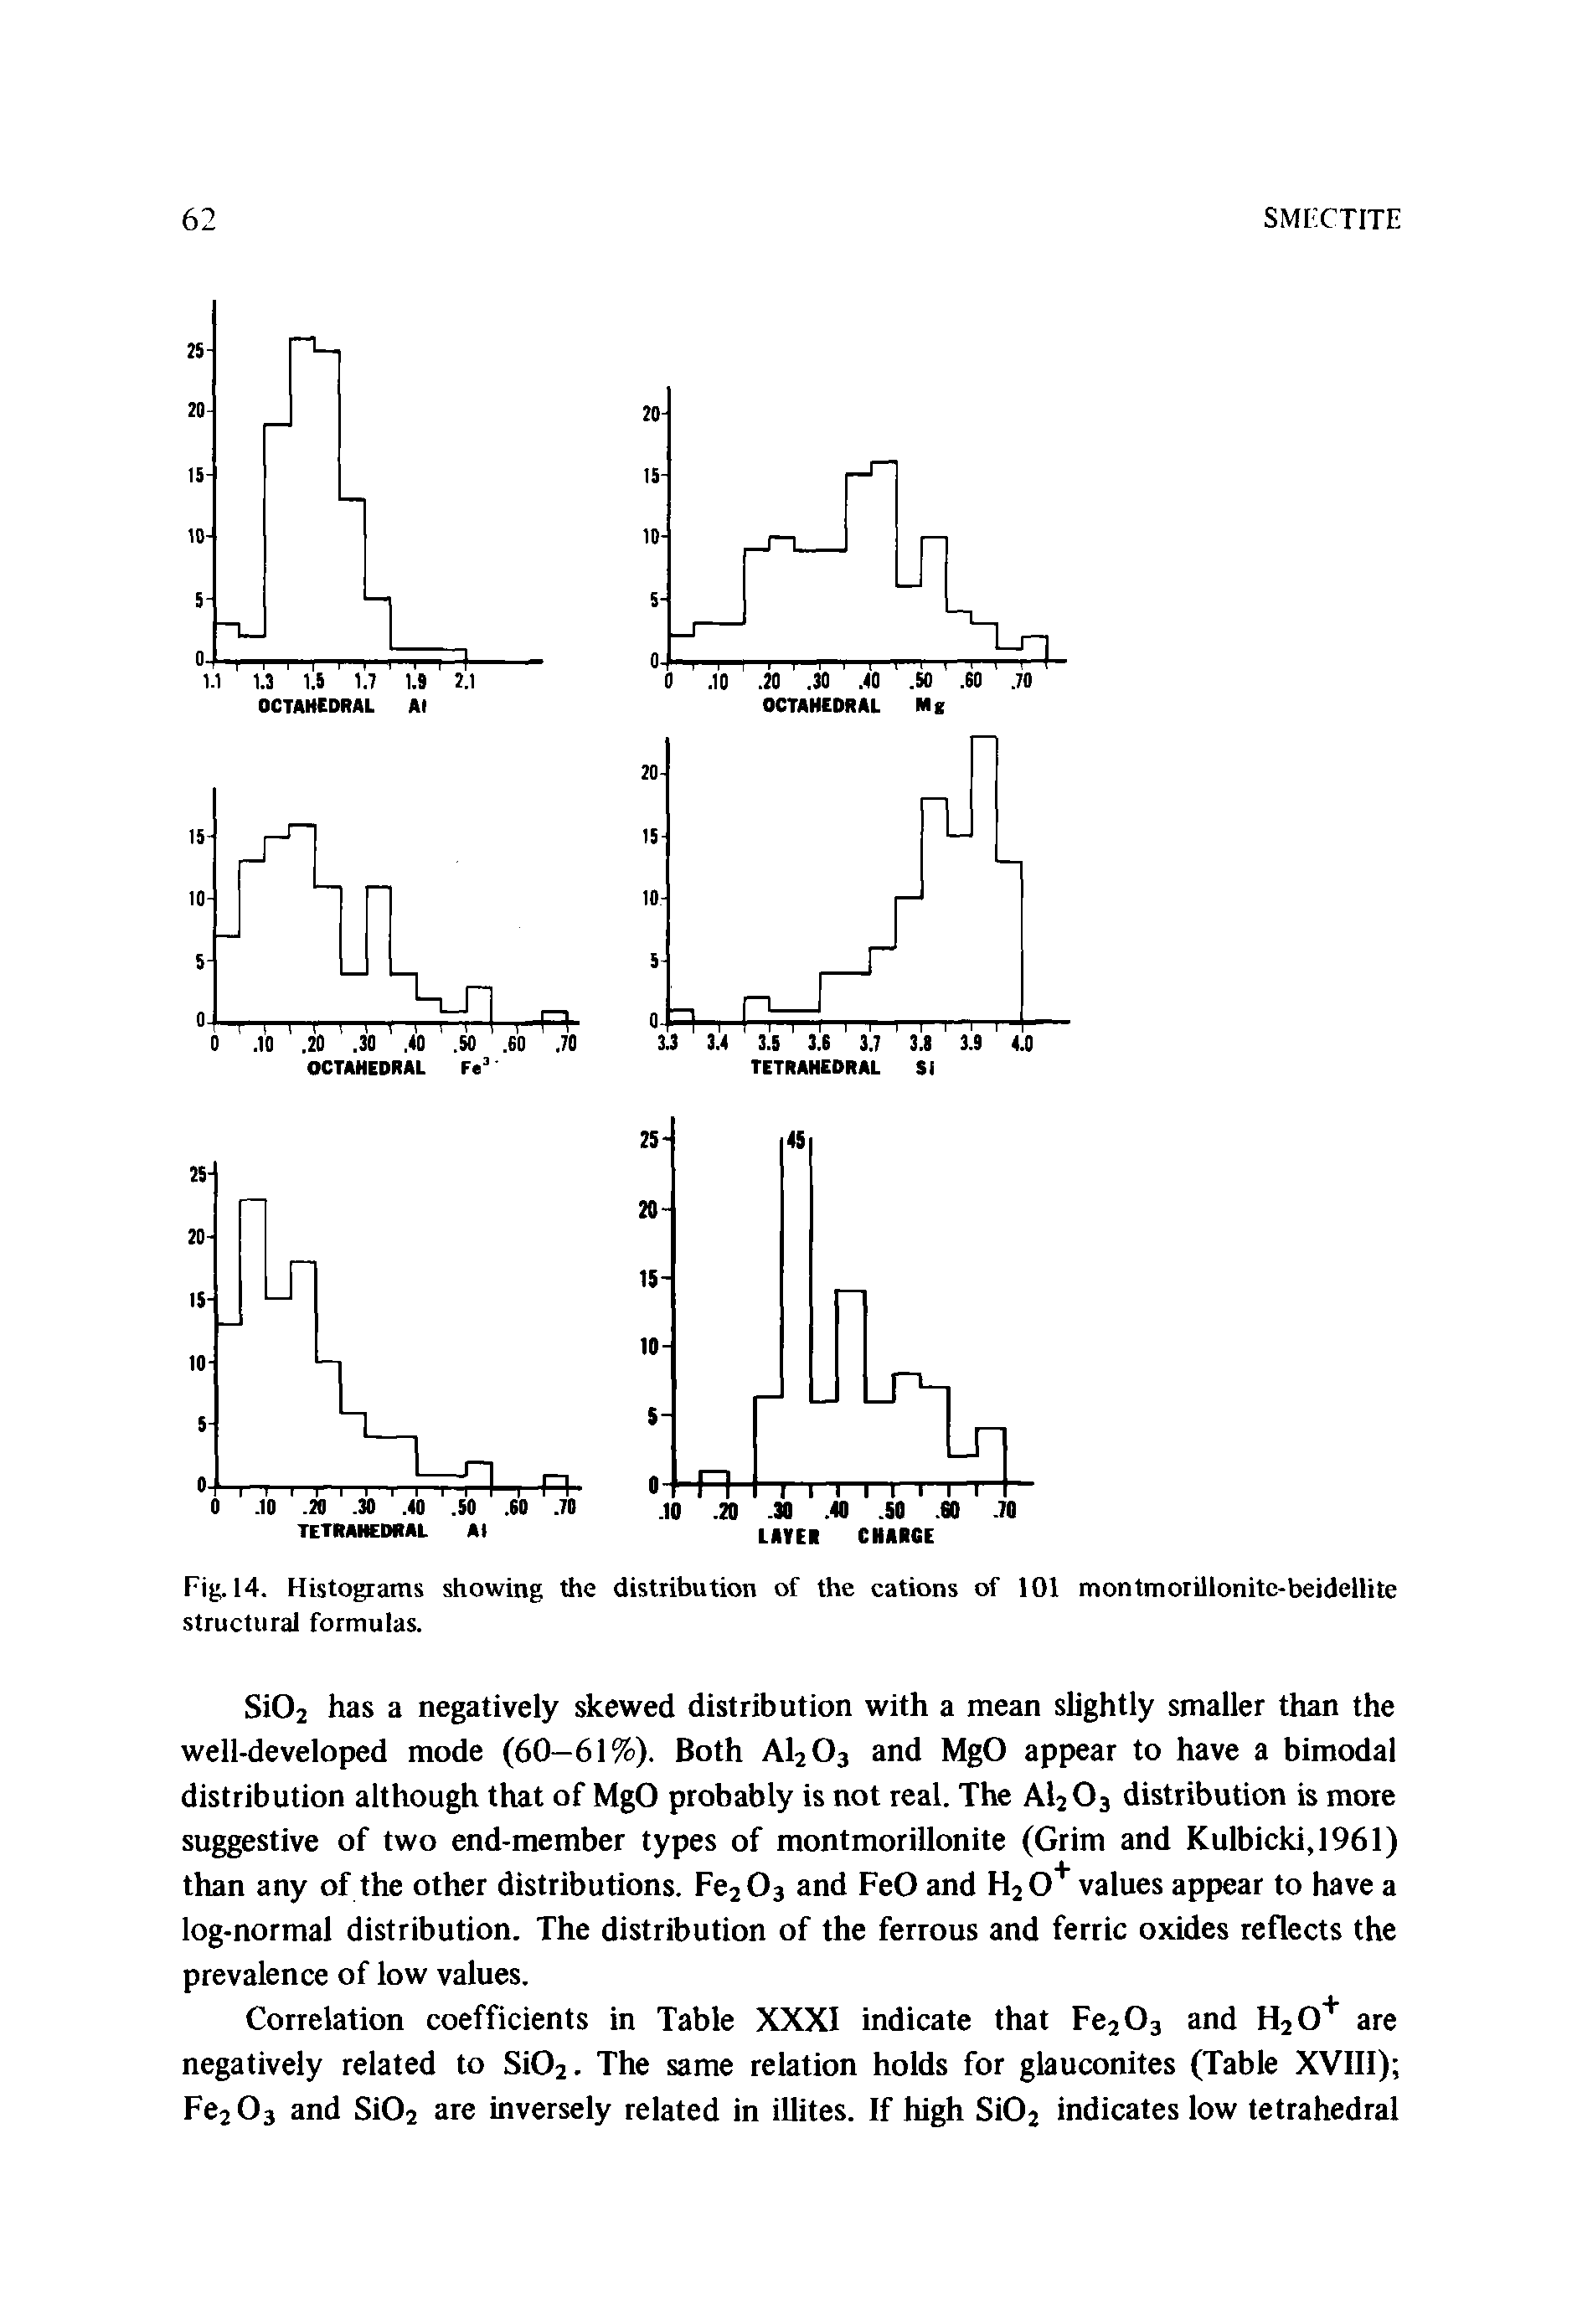 Fig. 14. Histograms showing the distribution of the cations of 101 montmorillonite-beidellite structural formulas.